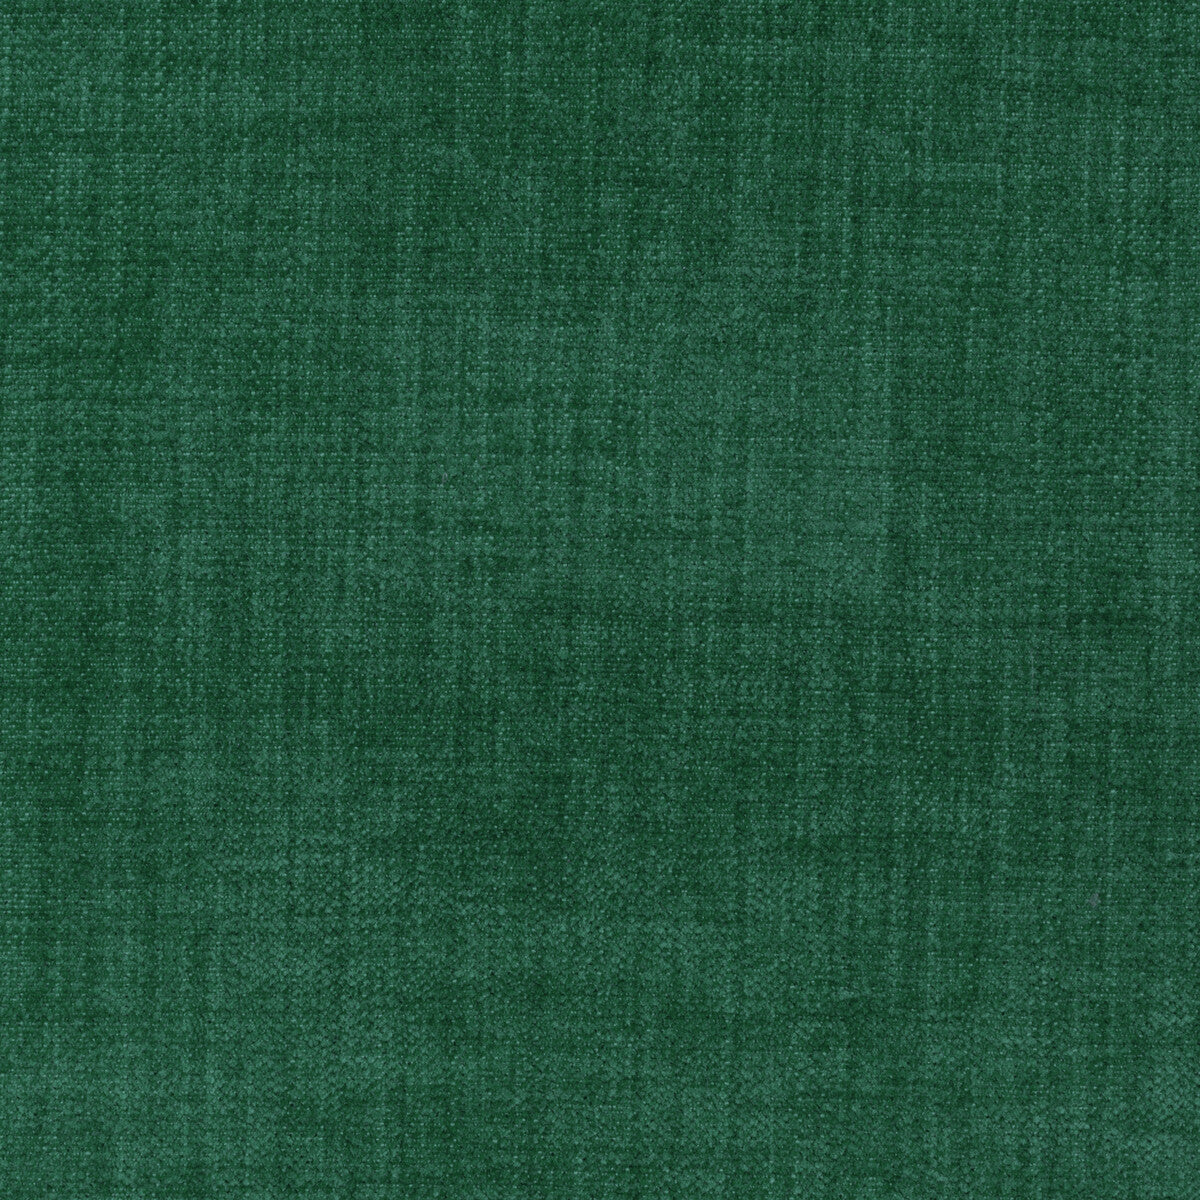 Accommodate fabric in bottlegreen color - pattern 36255.53.0 - by Kravet Contract in the Supreen collection